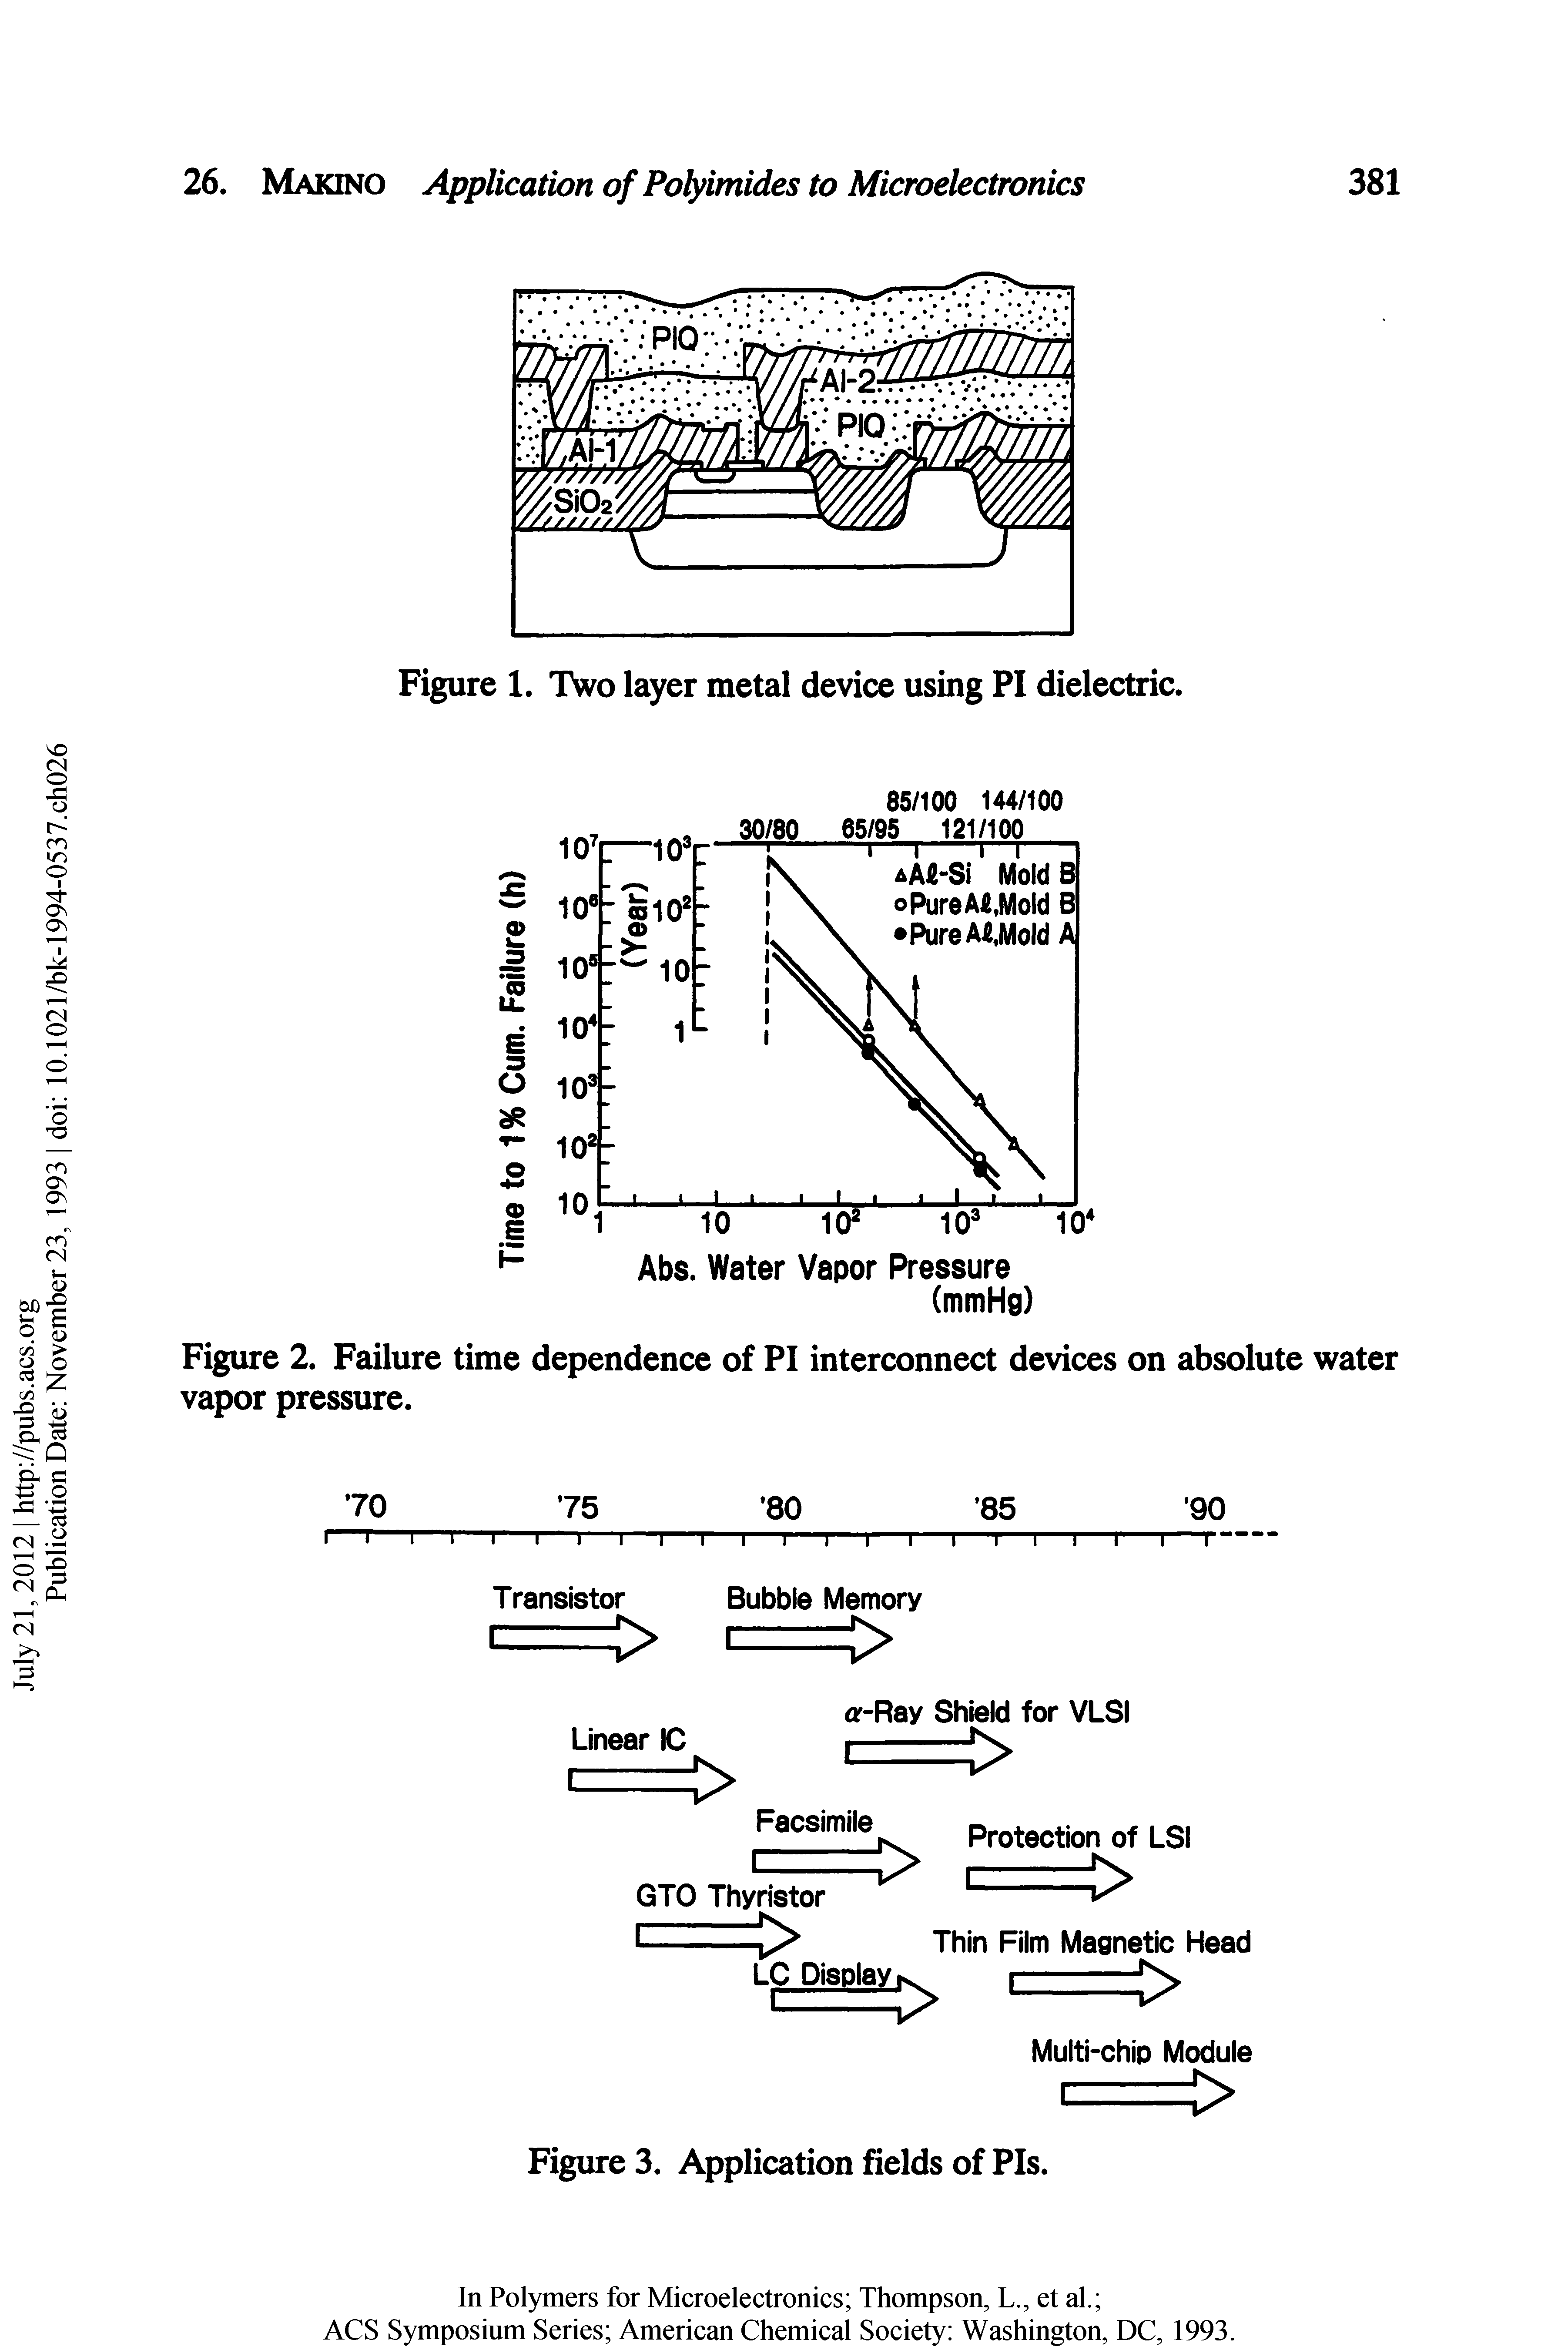 Figure 2. Failure time dependence of PI interconnect devices on absolute water vapor pressure.